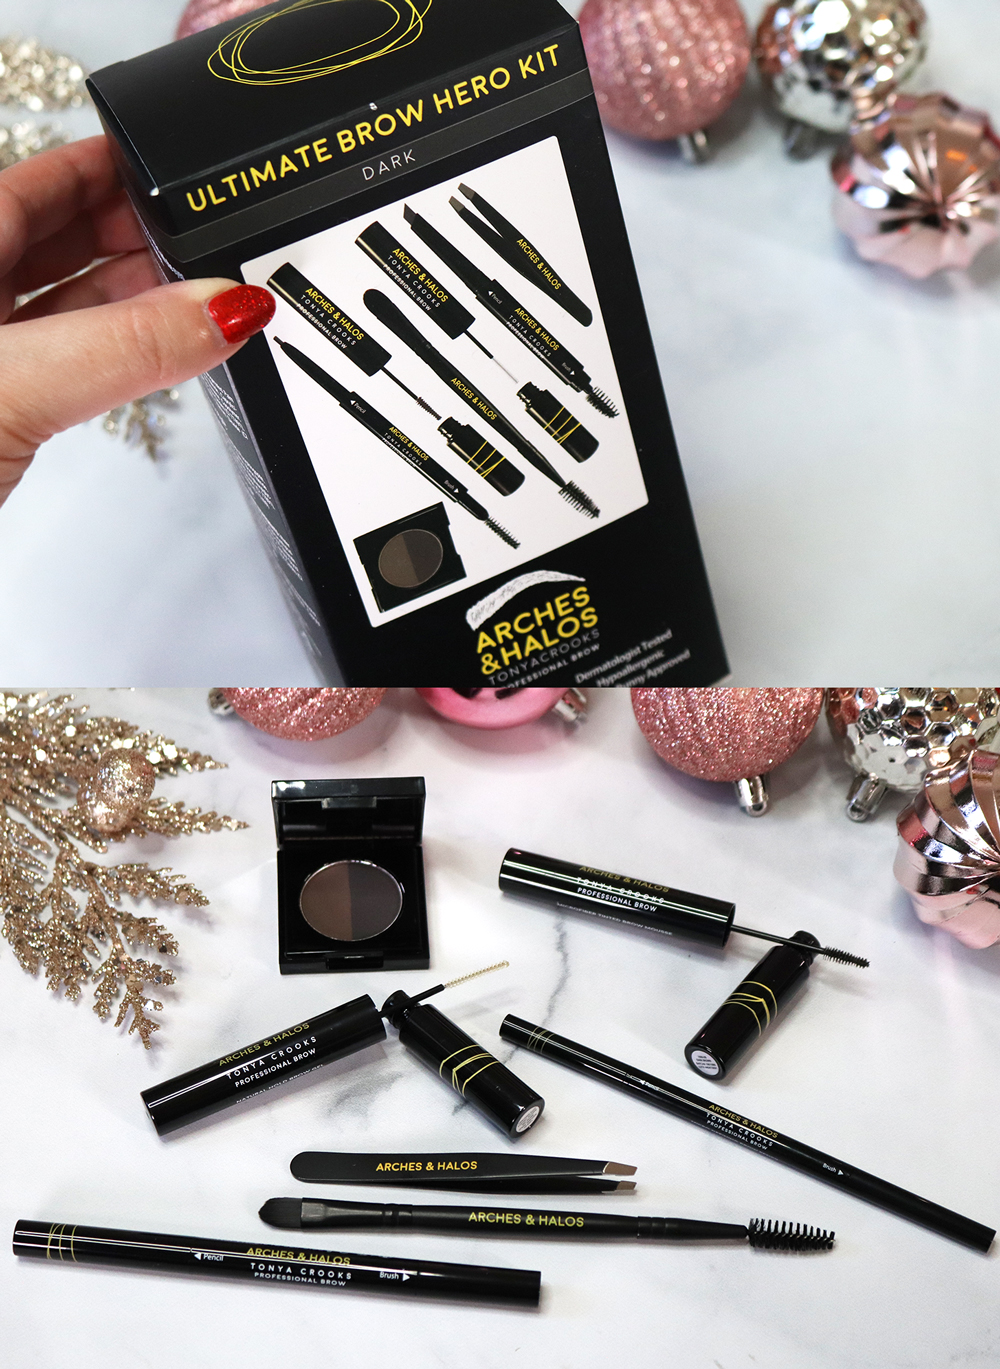 Cruelty Free Holiday Gift Guide 2020 - Arches and Halos Ultimate Brow Hero Kit